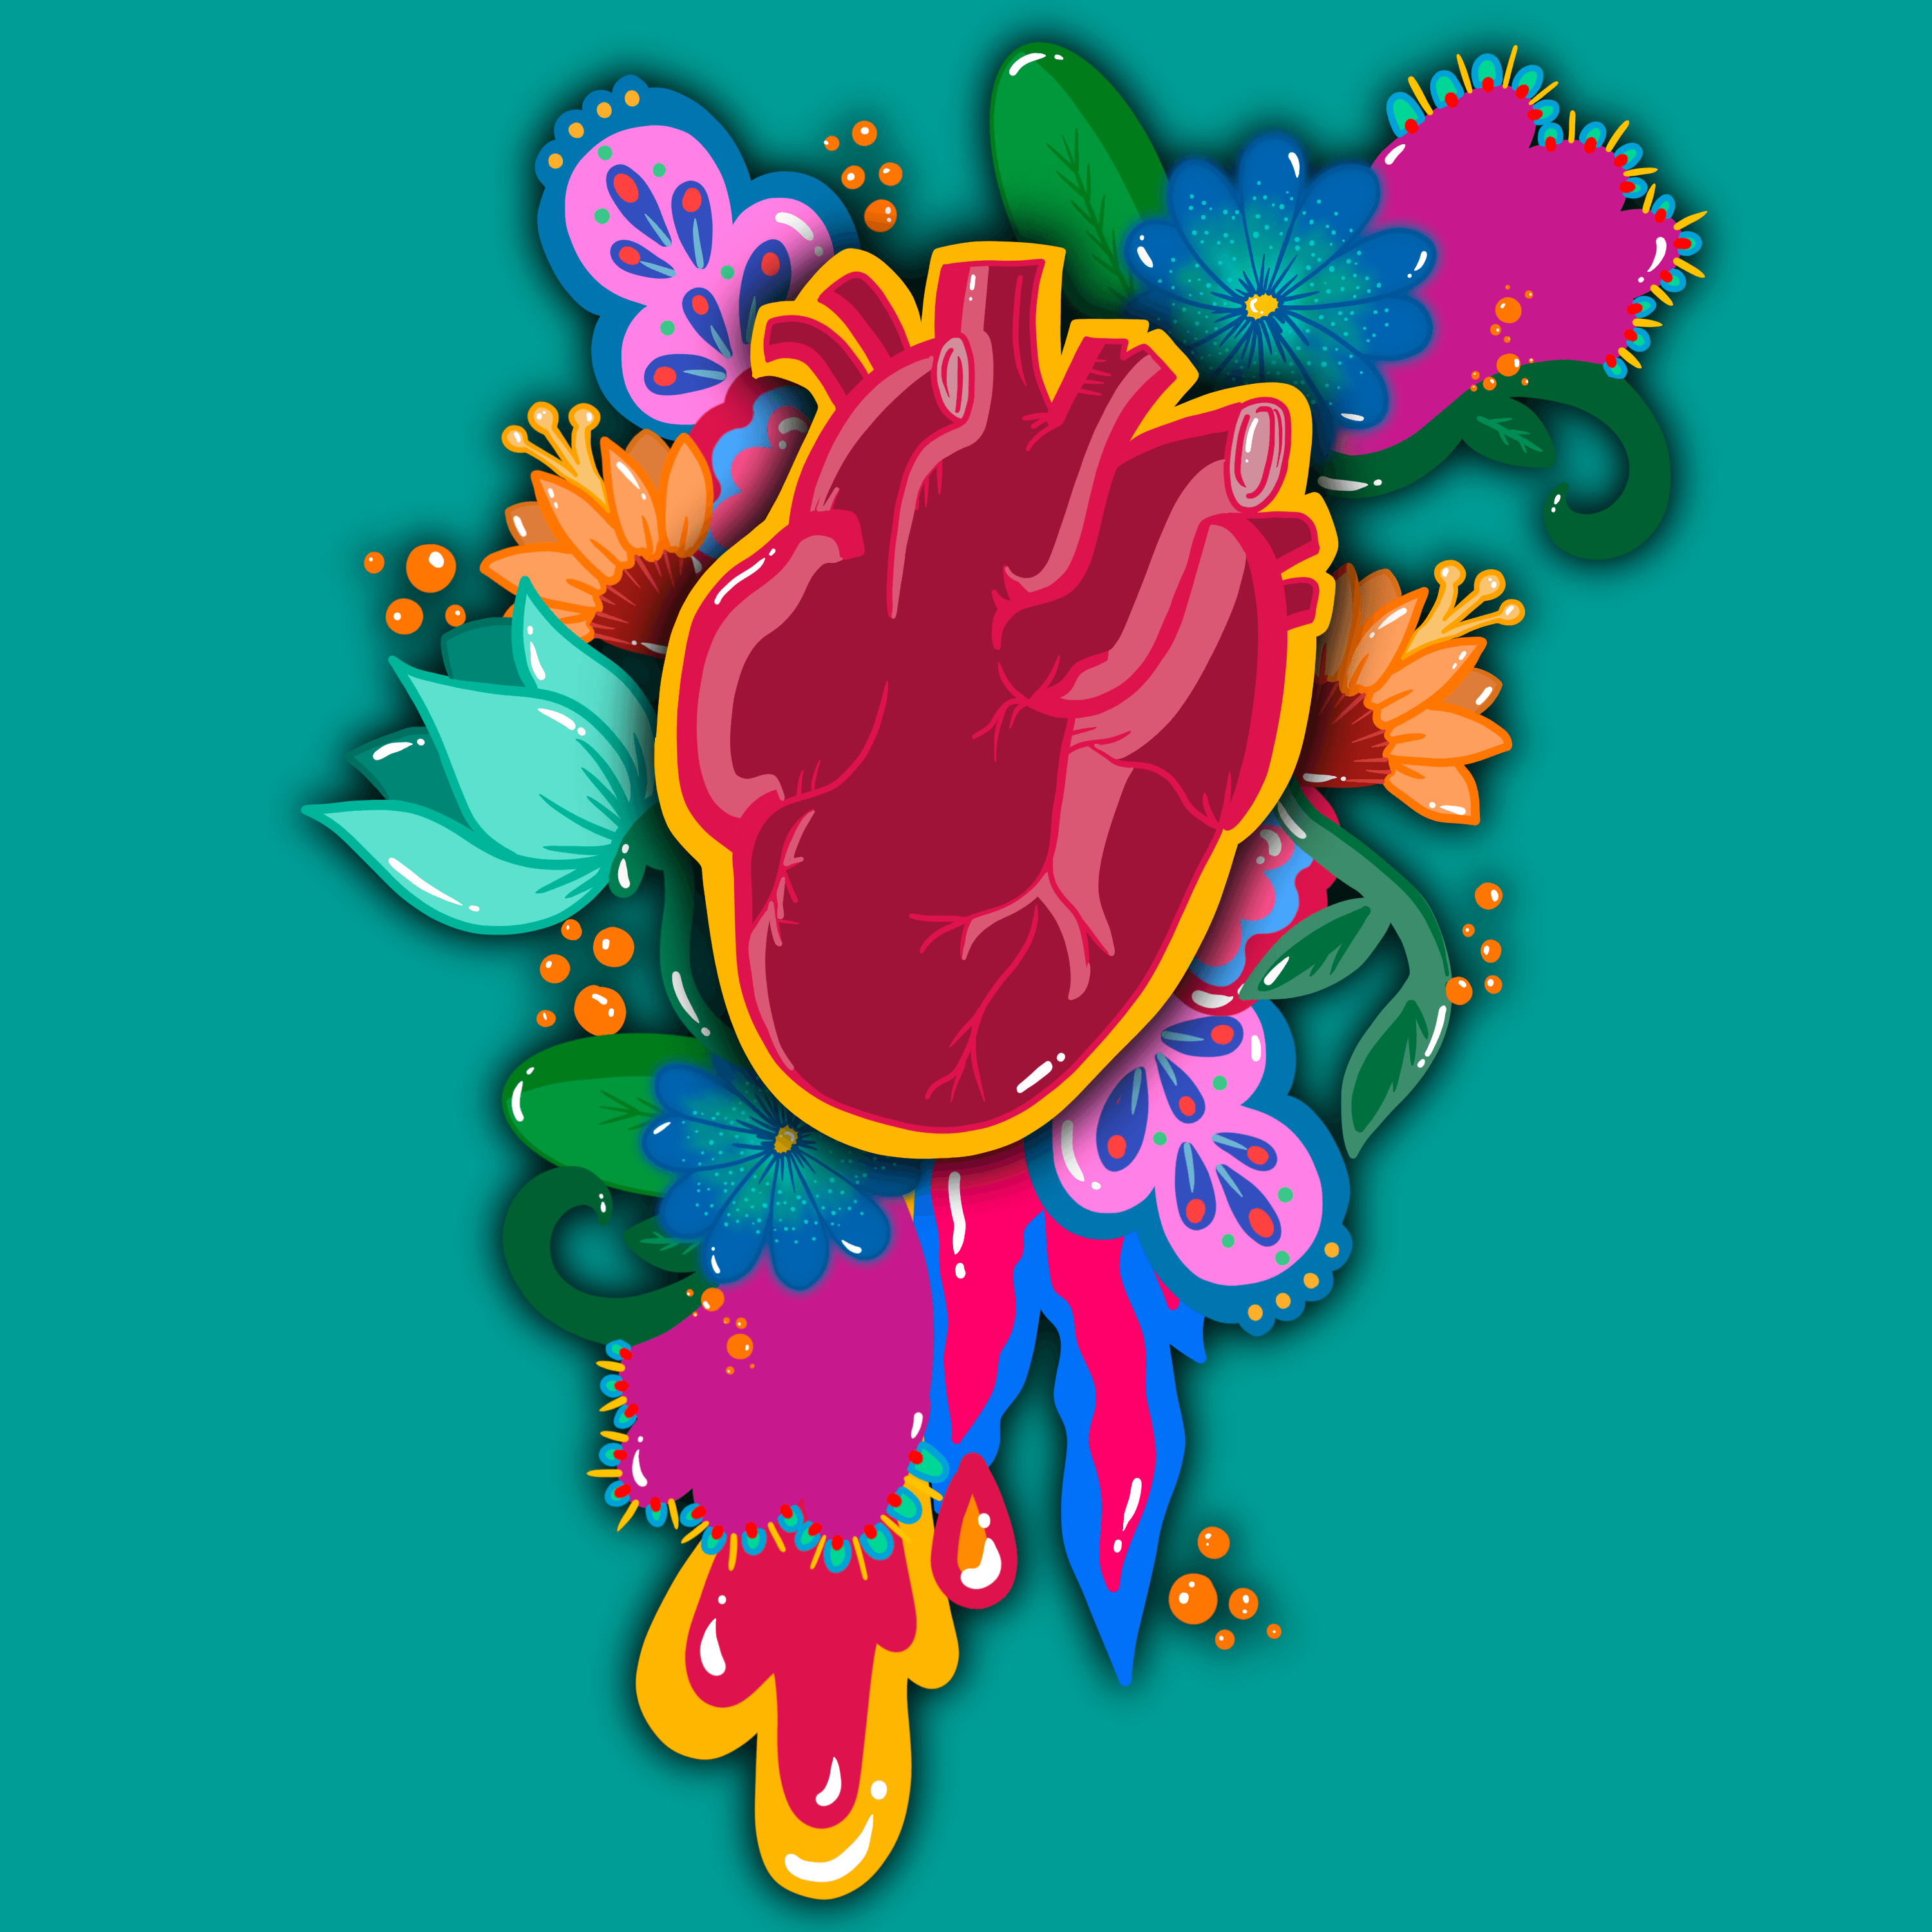 The Blooming Heart